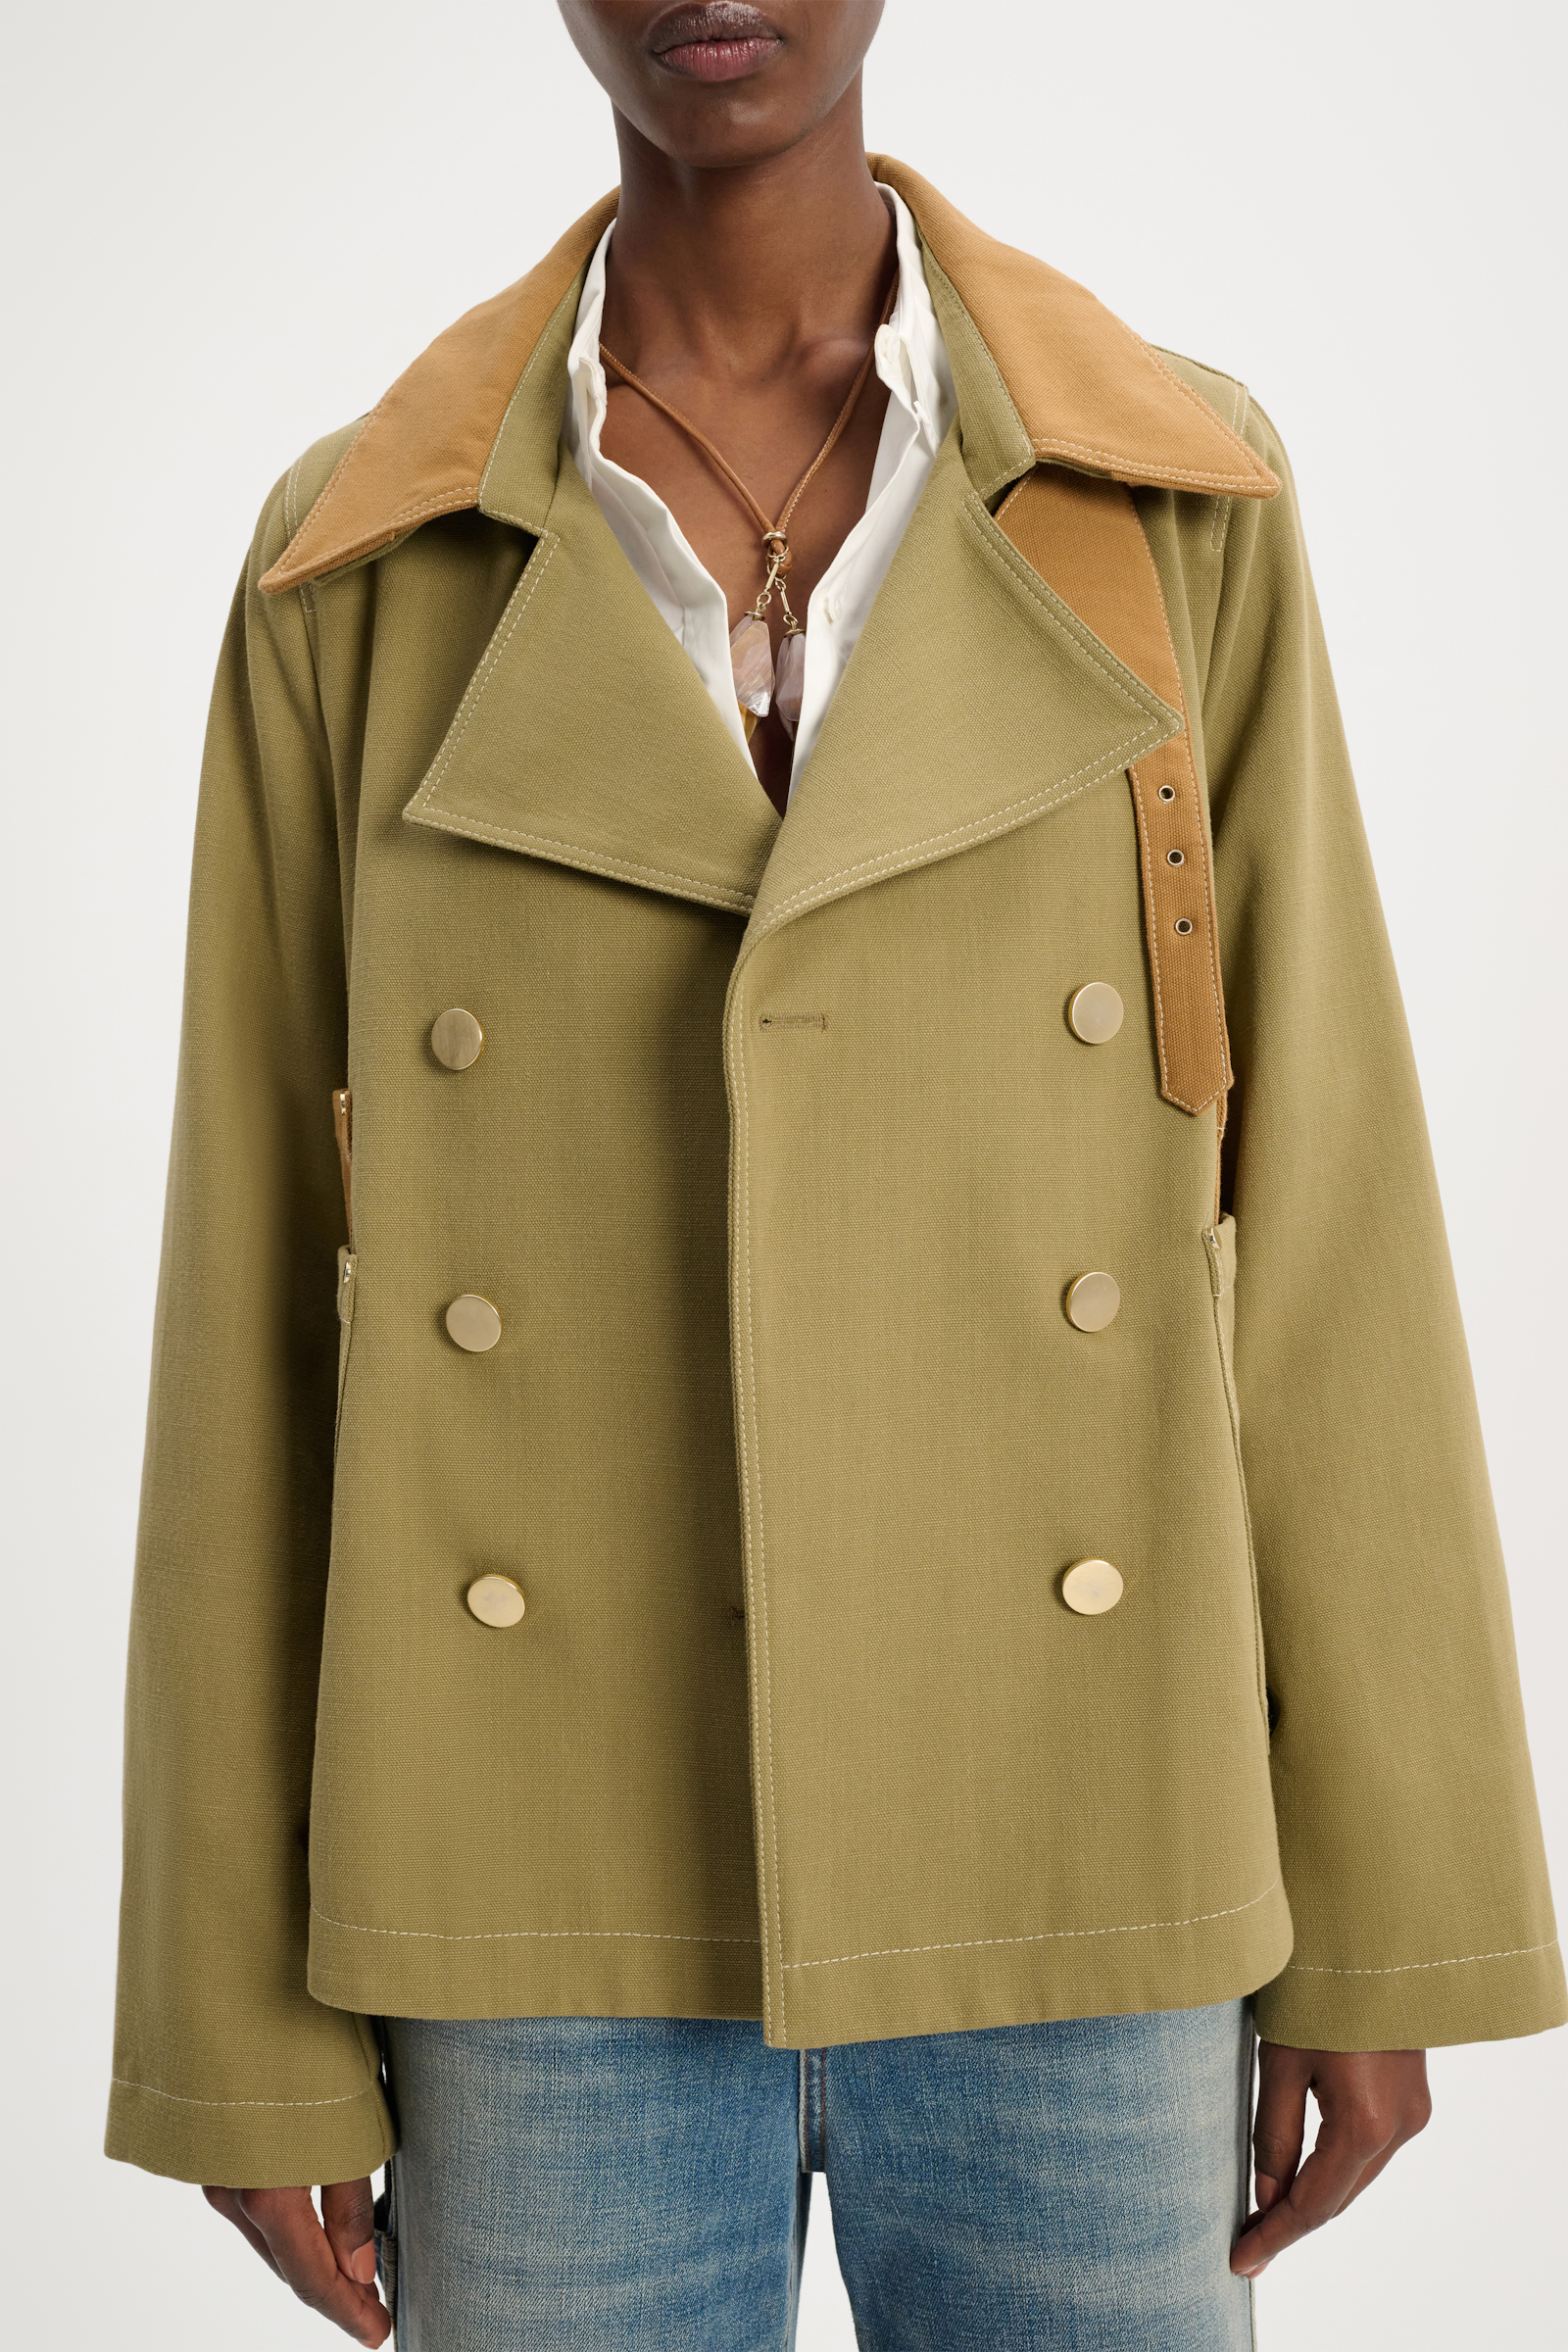 Dorothee Schumacher Double-breasted pea coat with contrast tonal trim soft olive green